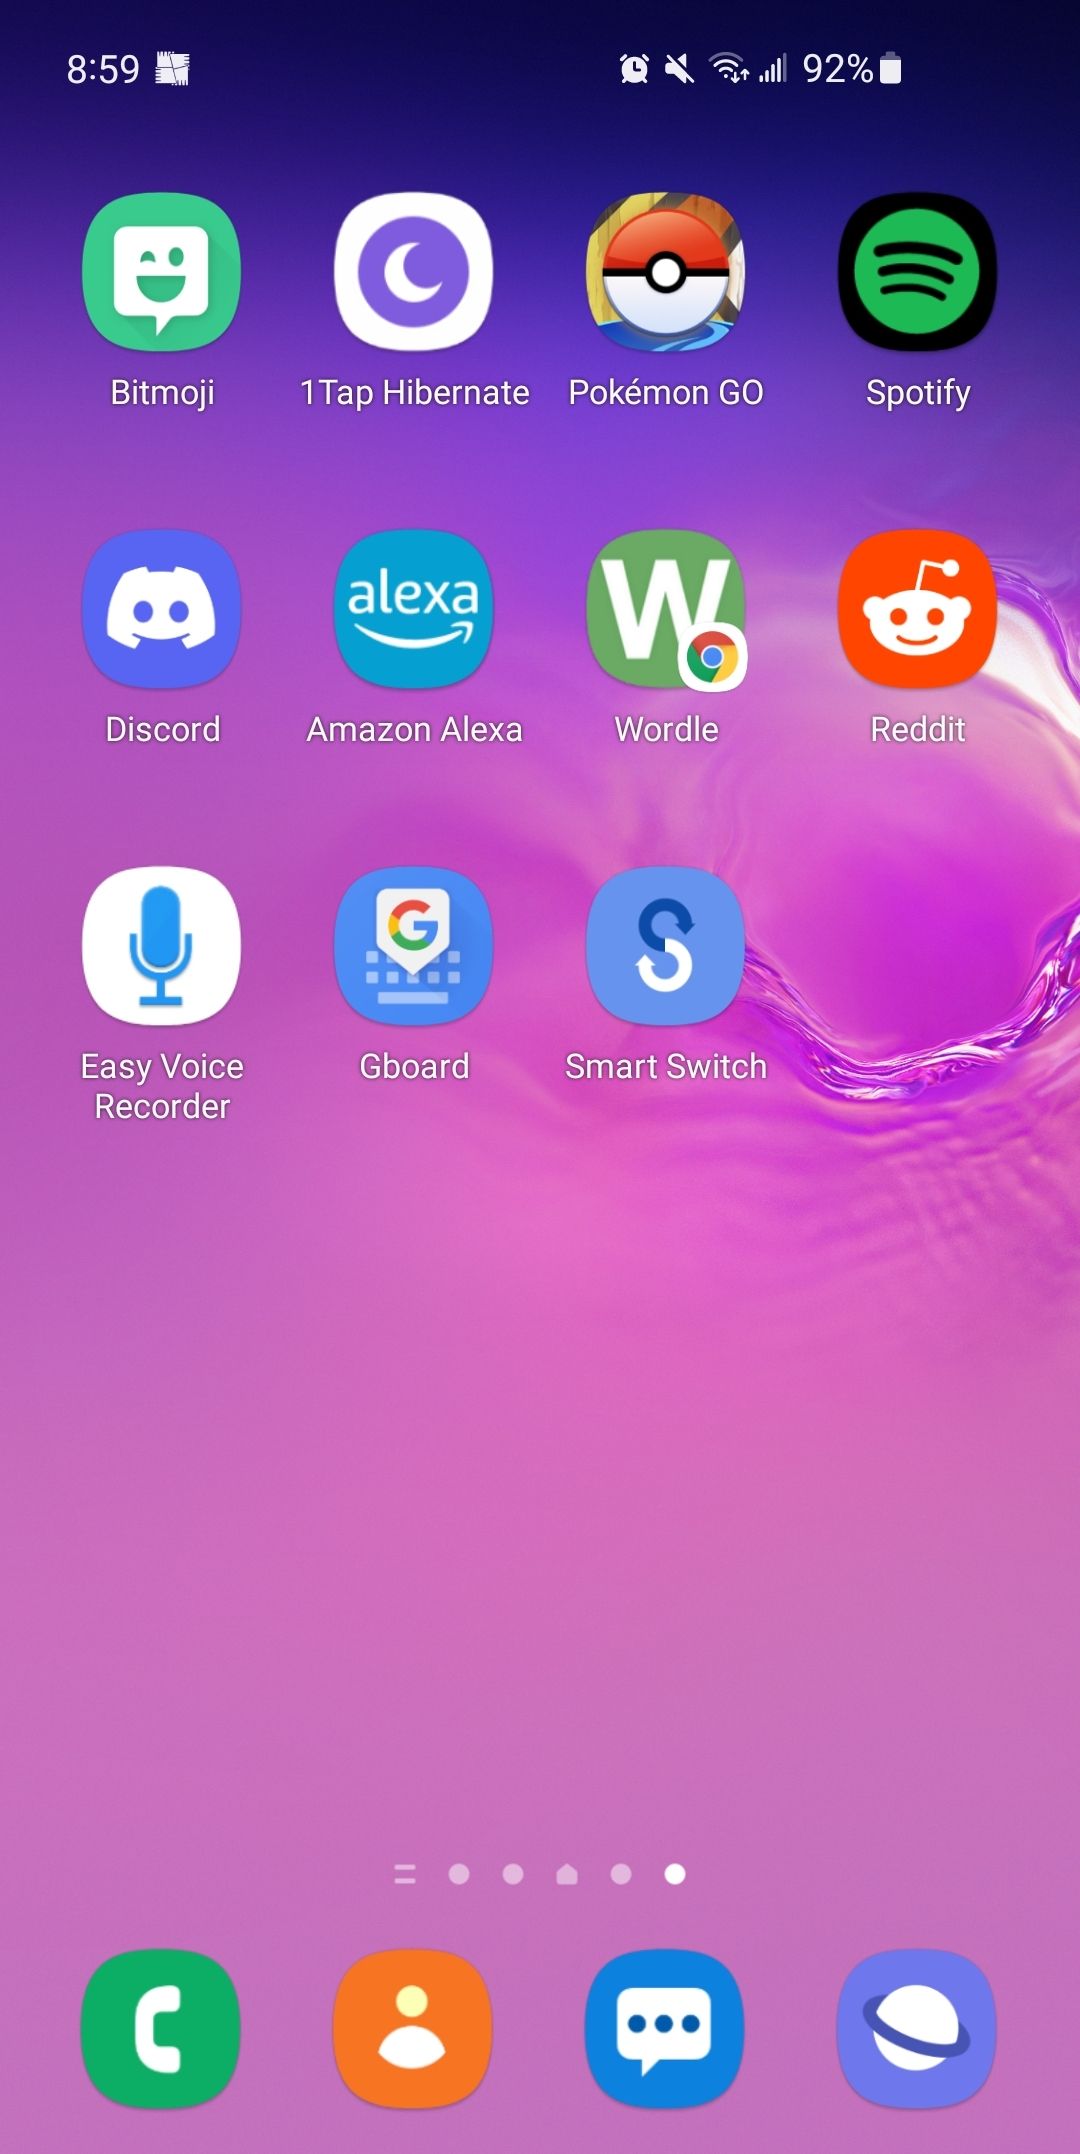 Wordle is now on your home screen